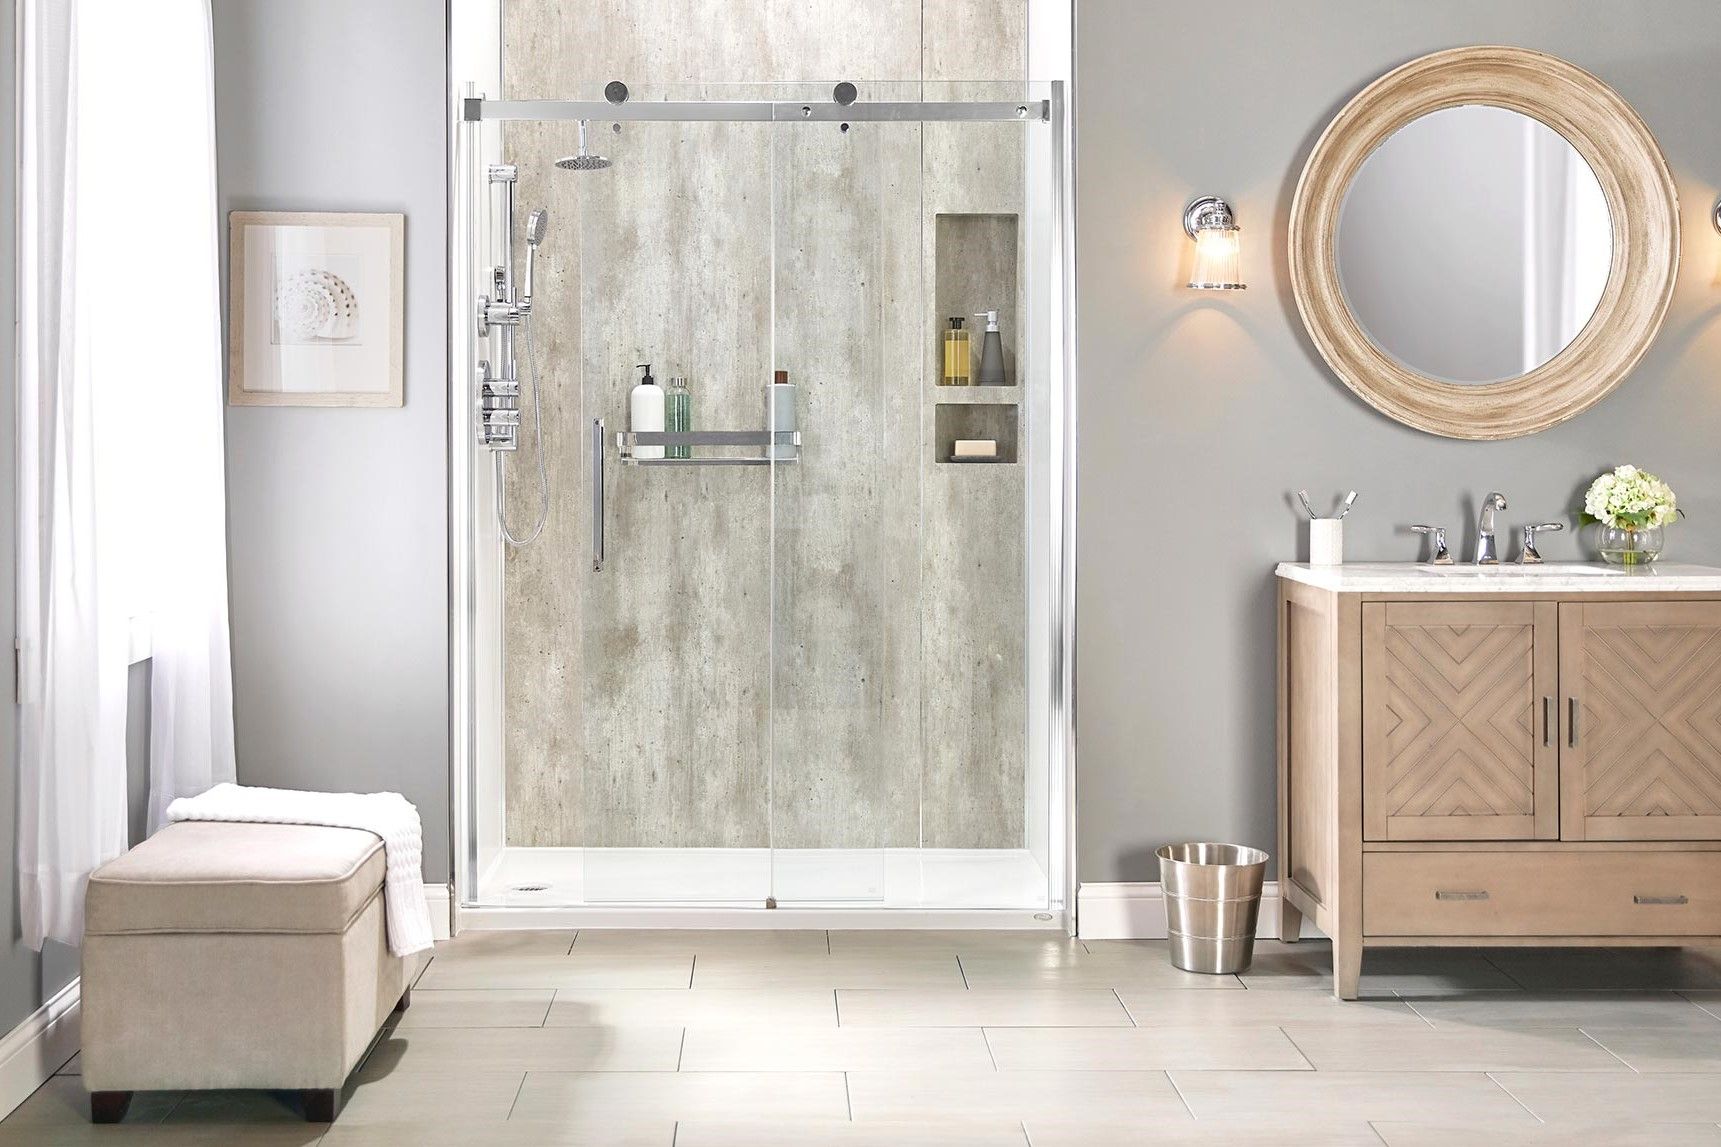 A tiled walk-in shower with glass sliding doors next to a single-sink vanity with two doors and one drawer below a round mirror.